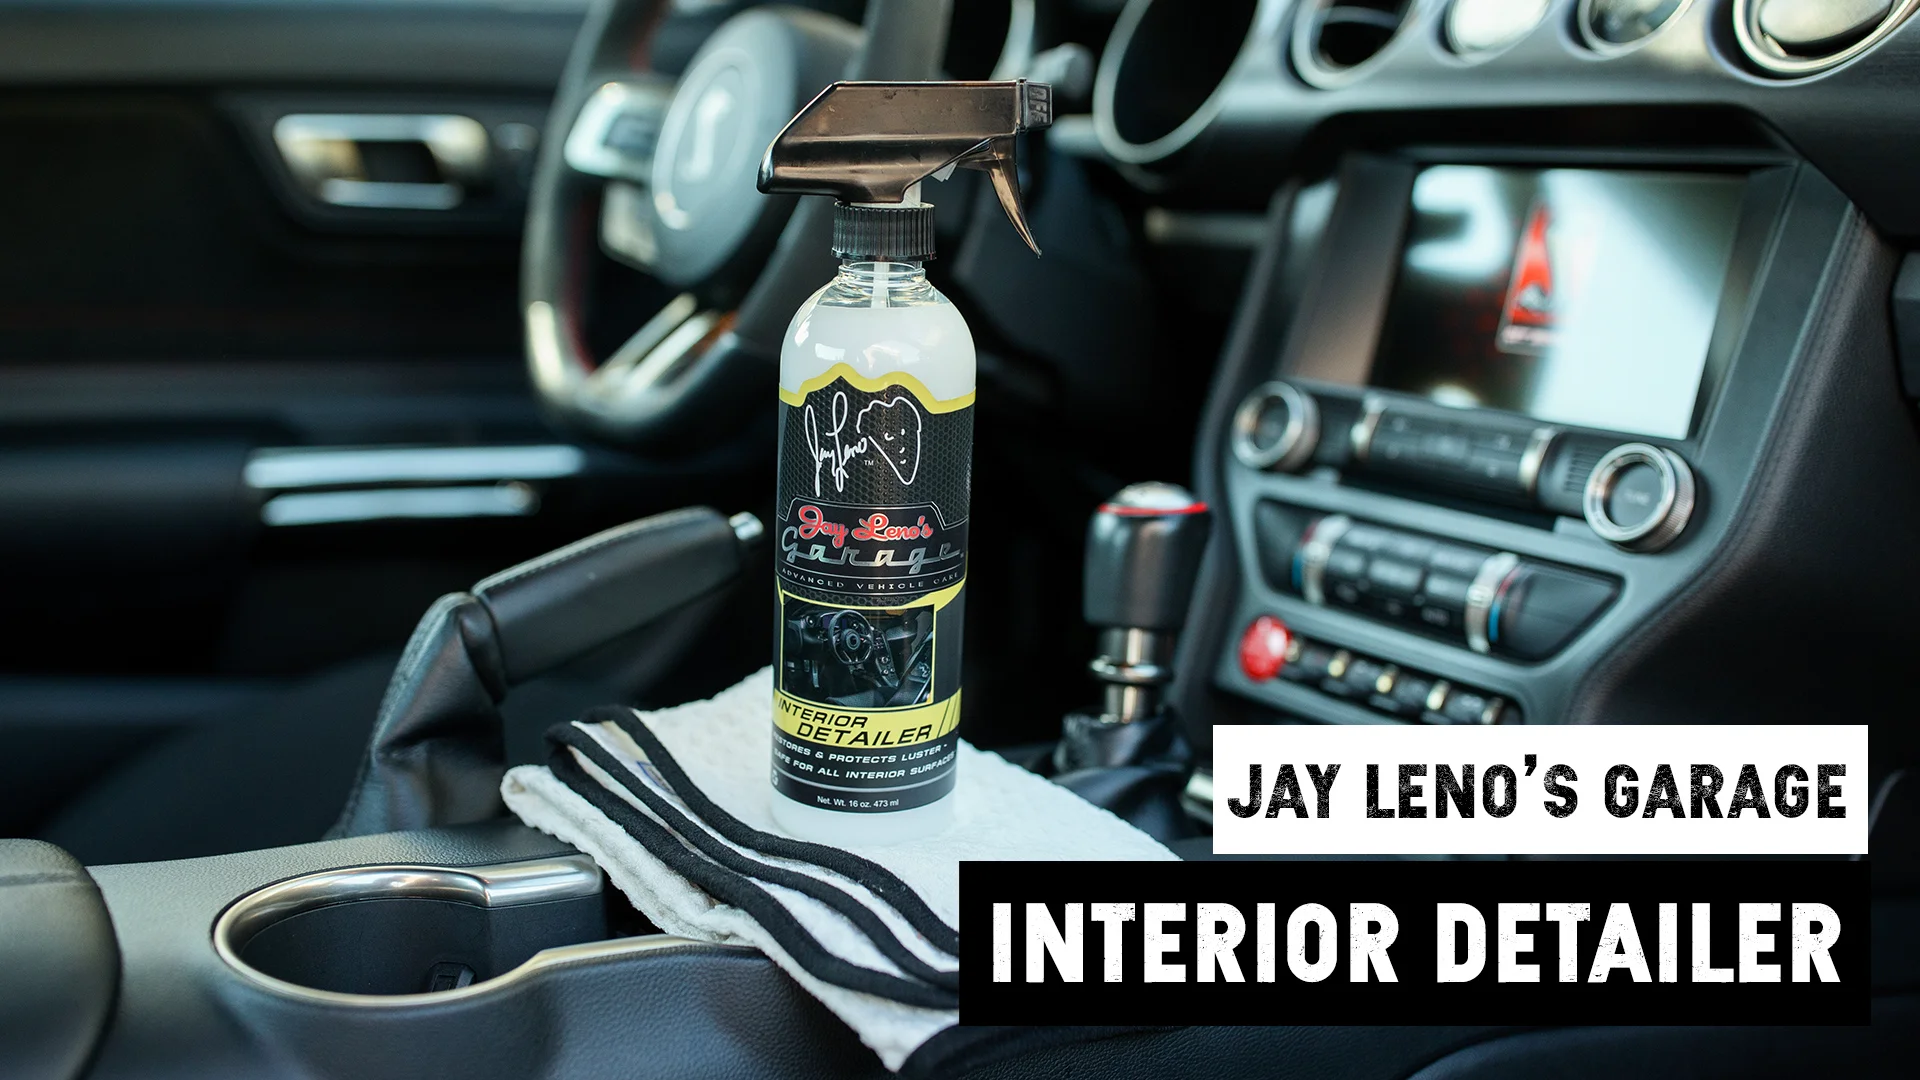  Jay Leno's Garage - Leather Conditioner - Leather Care (16 oz.)  : Automotive